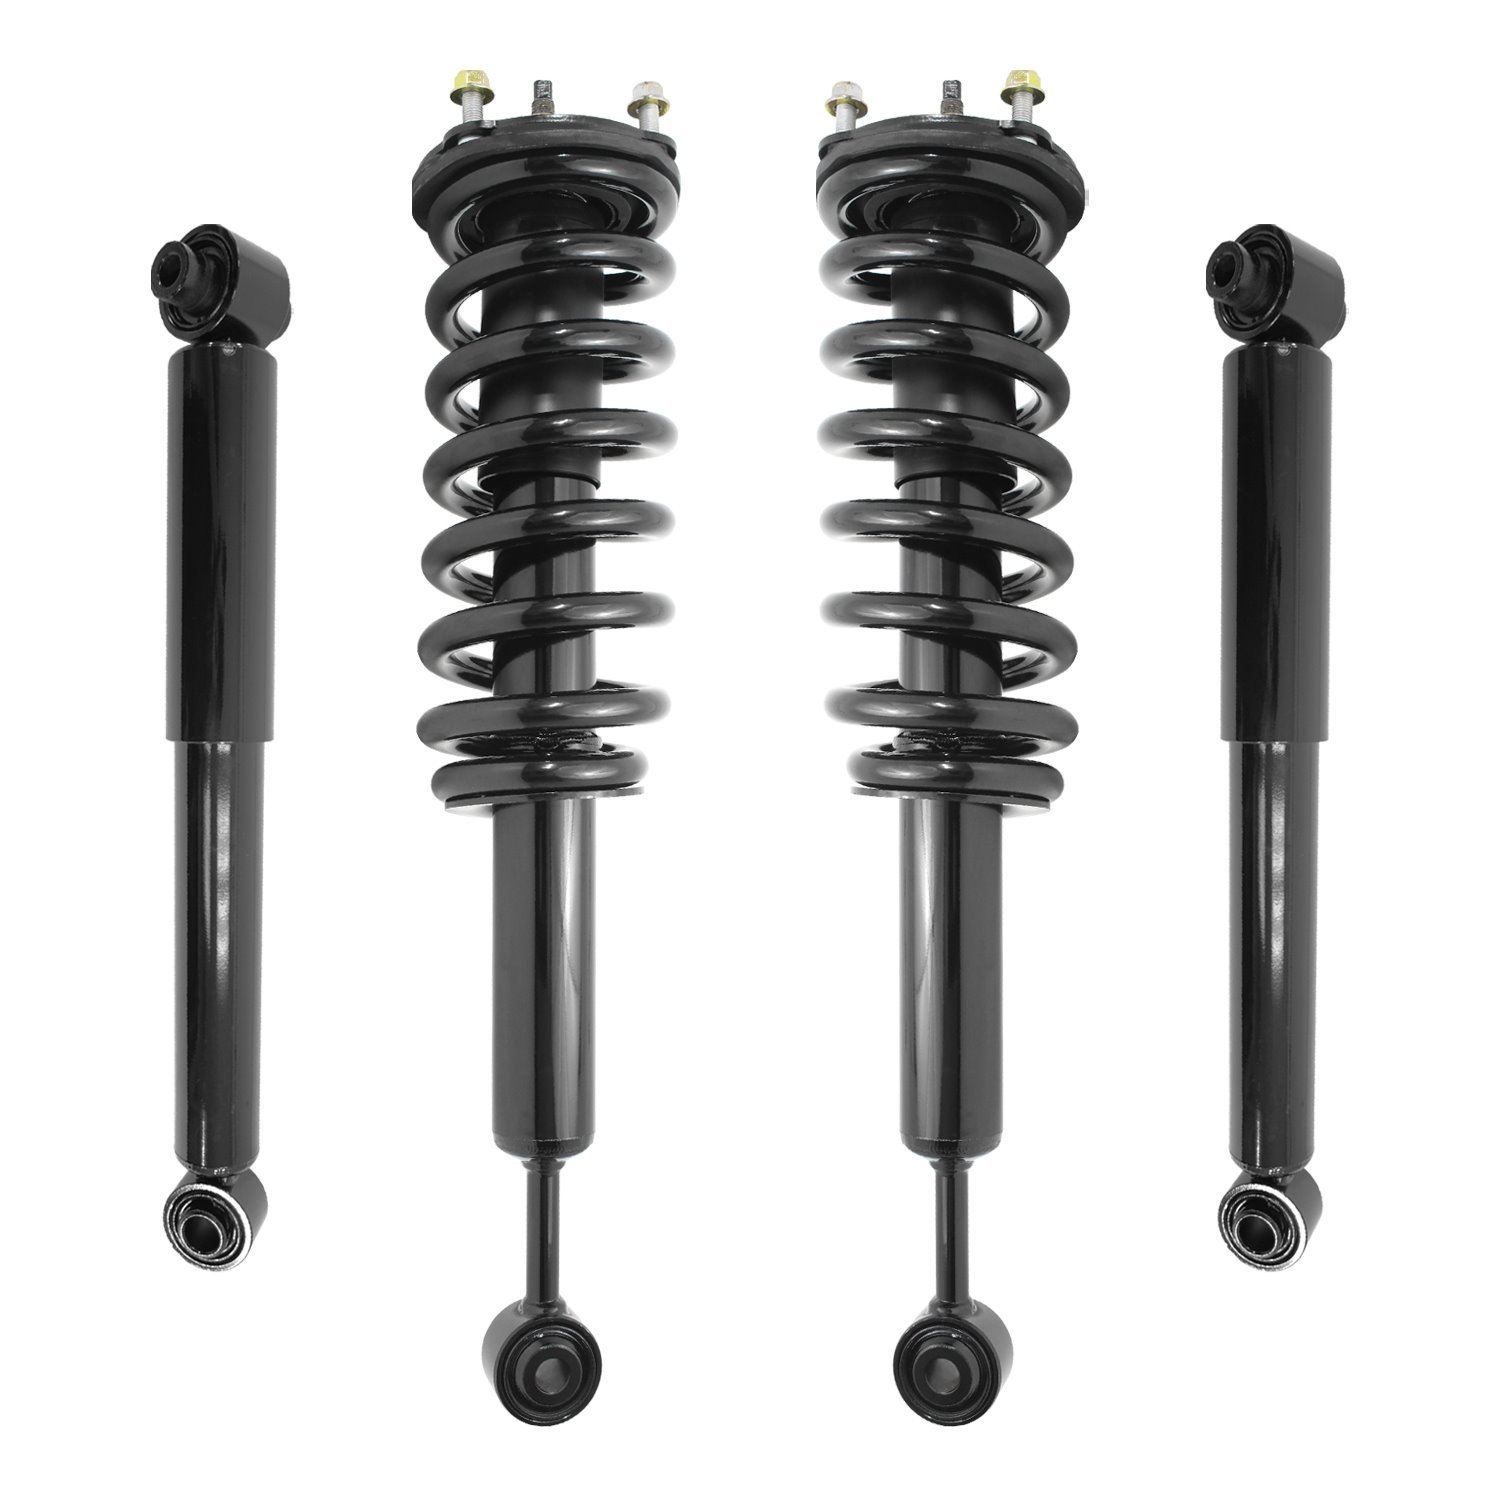 4-11383-254150-001 Front & Rear Suspension Strut & Coil Spring Assembly Fits Select Toyota Sequoia